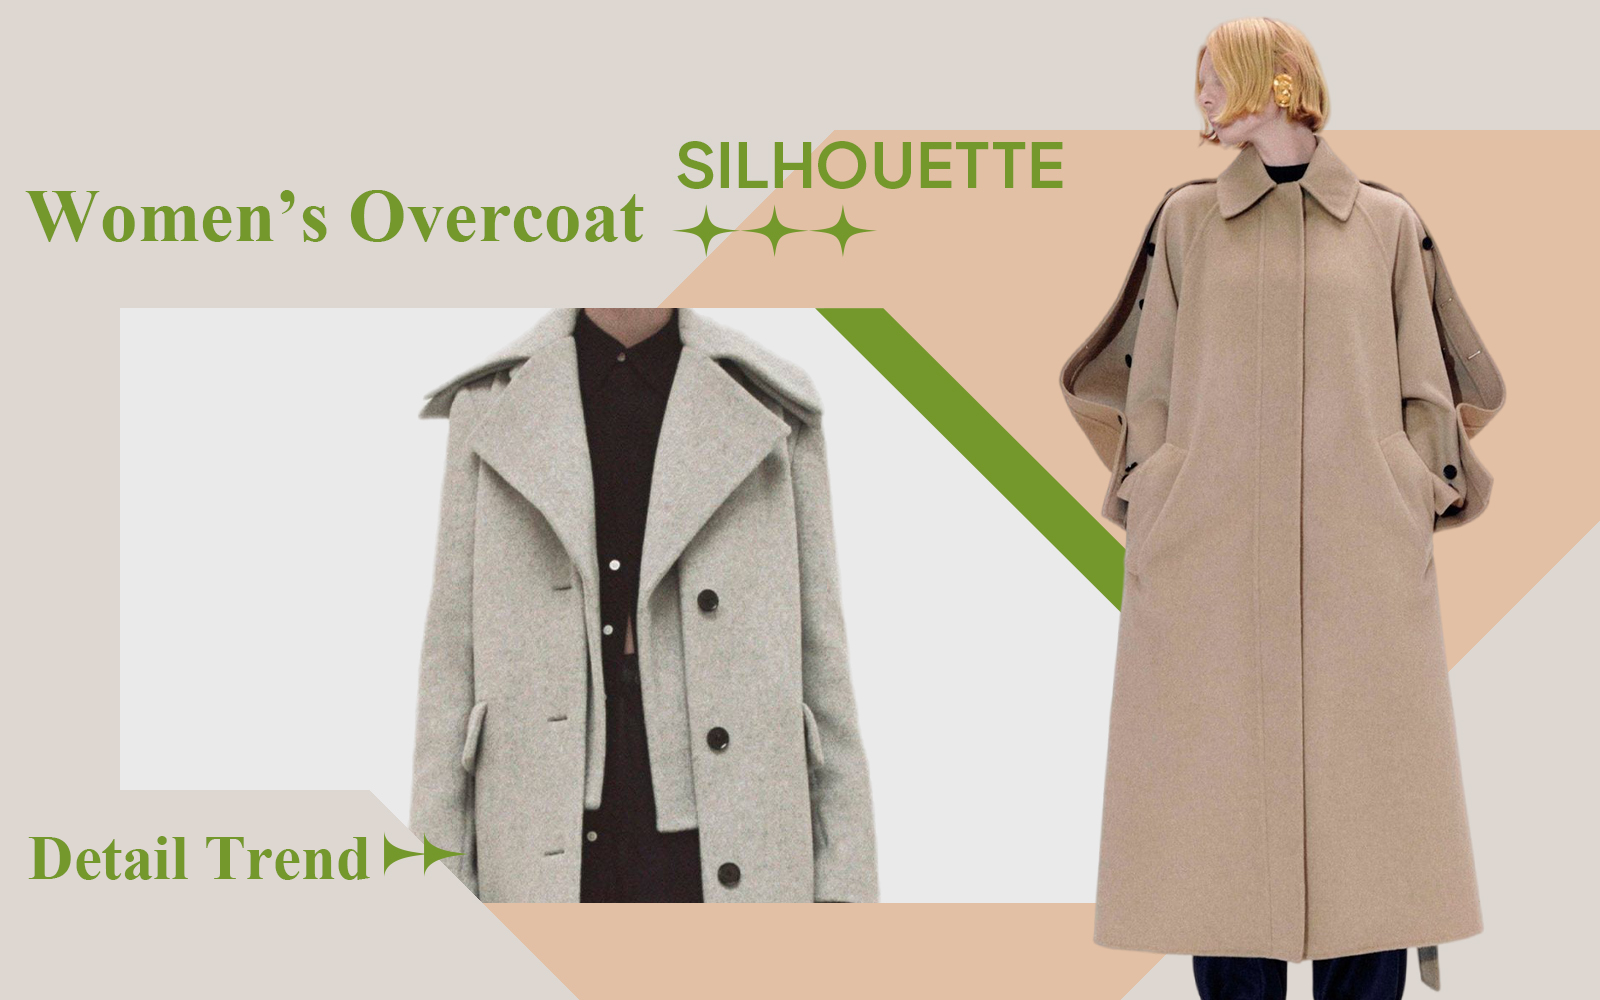 The Detail & Craft Trend for Women's Overcoat